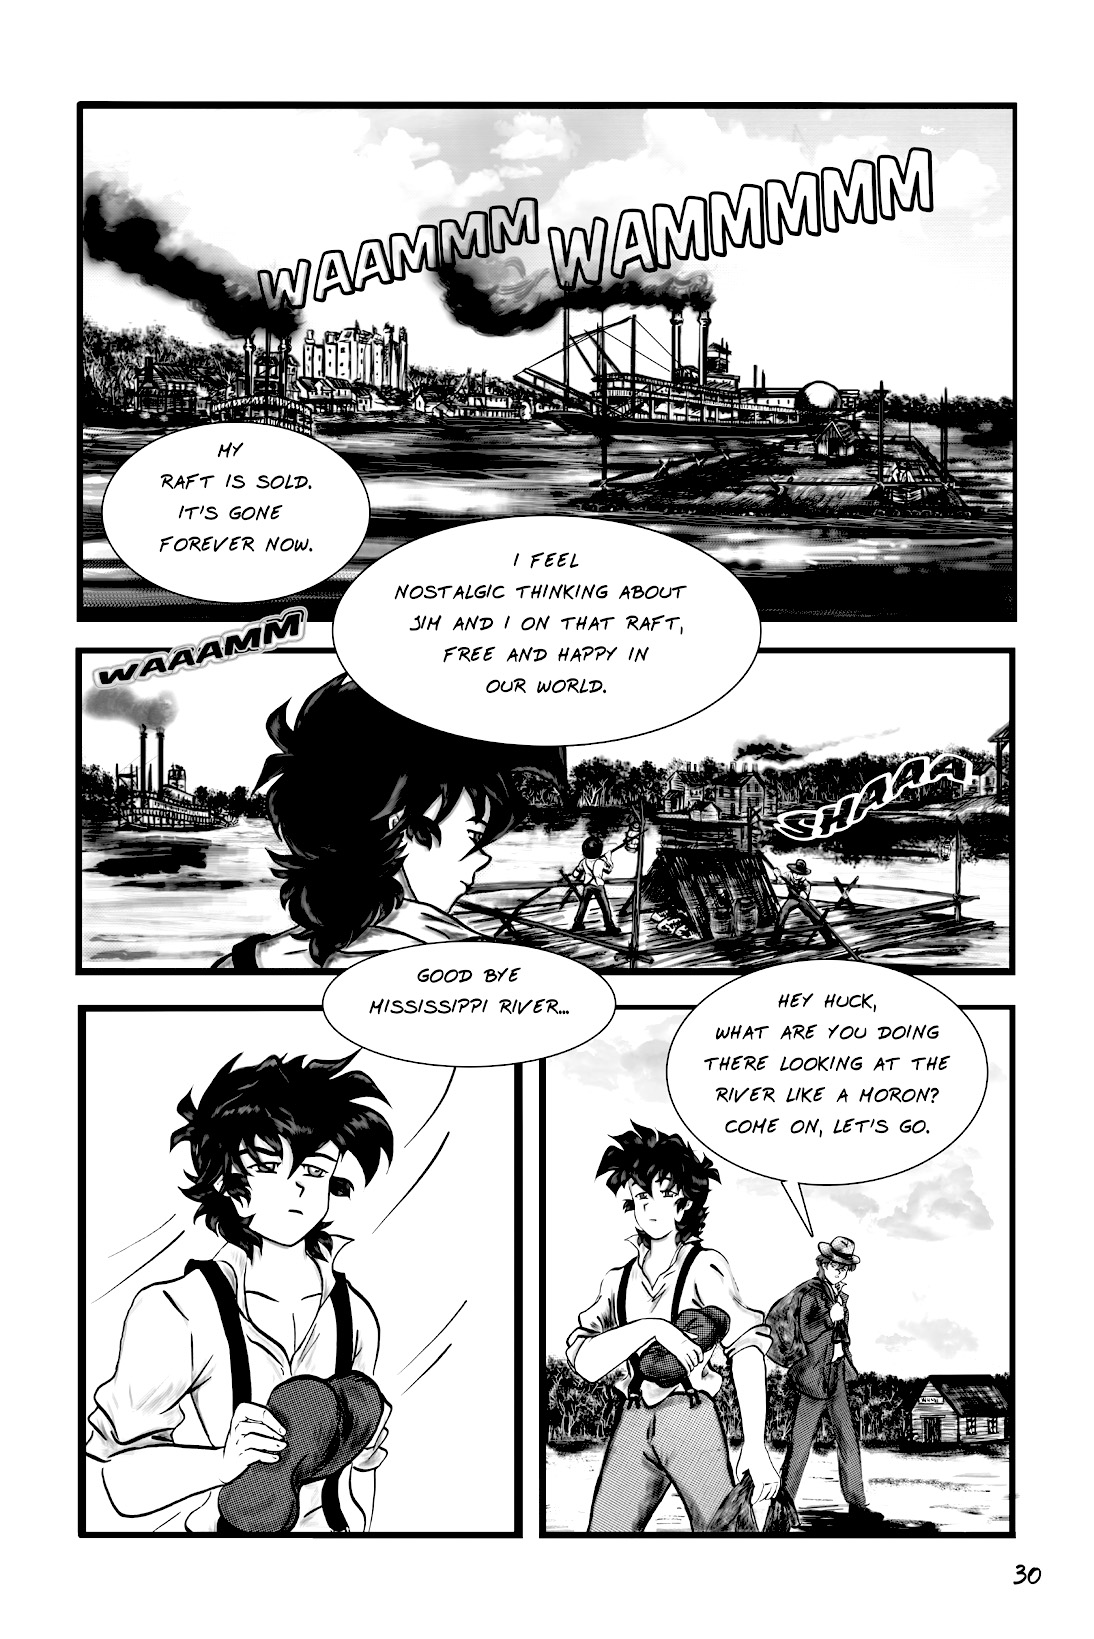 page30-Legends of the West Vol